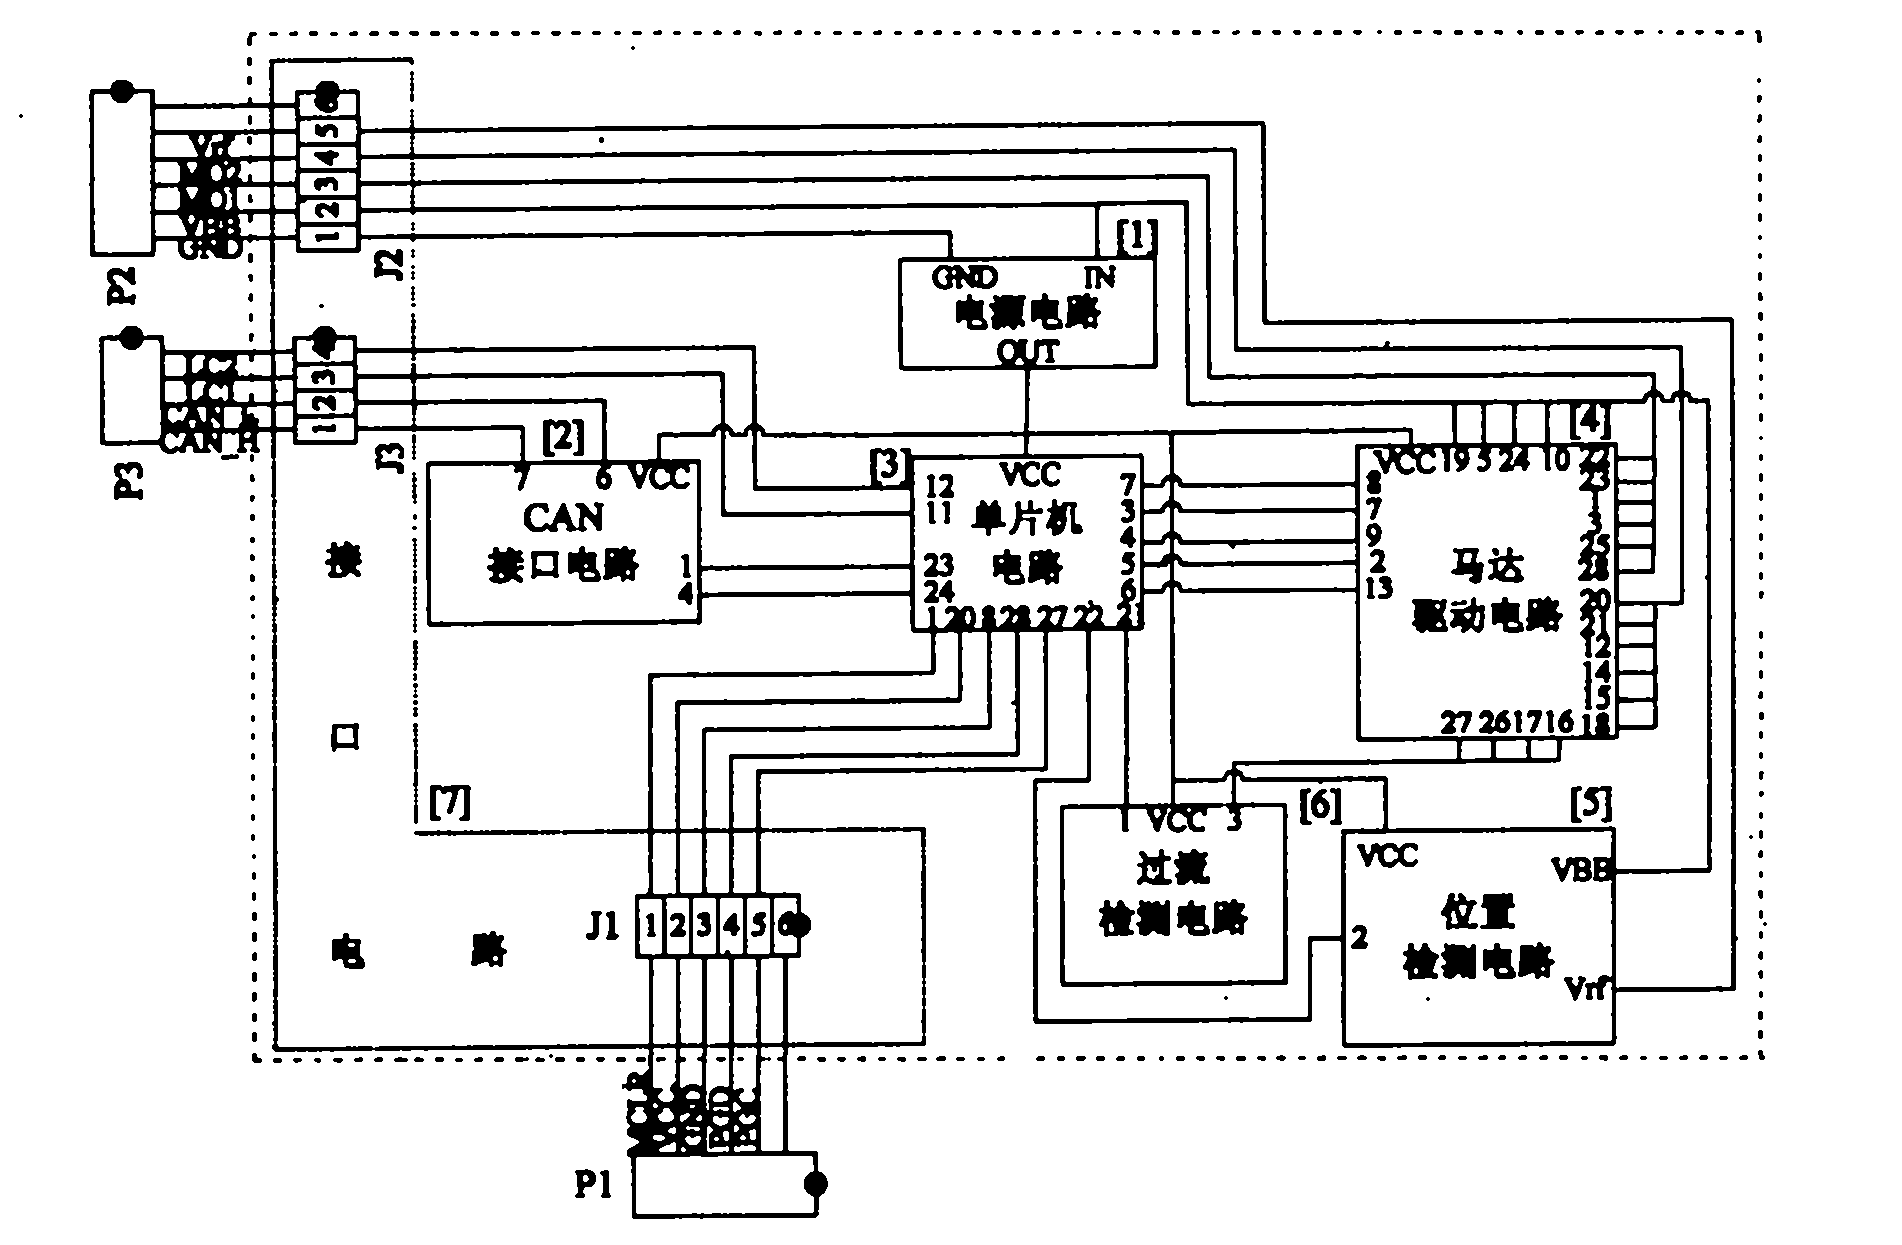 Control apparatus of motor central lock with CAN interface